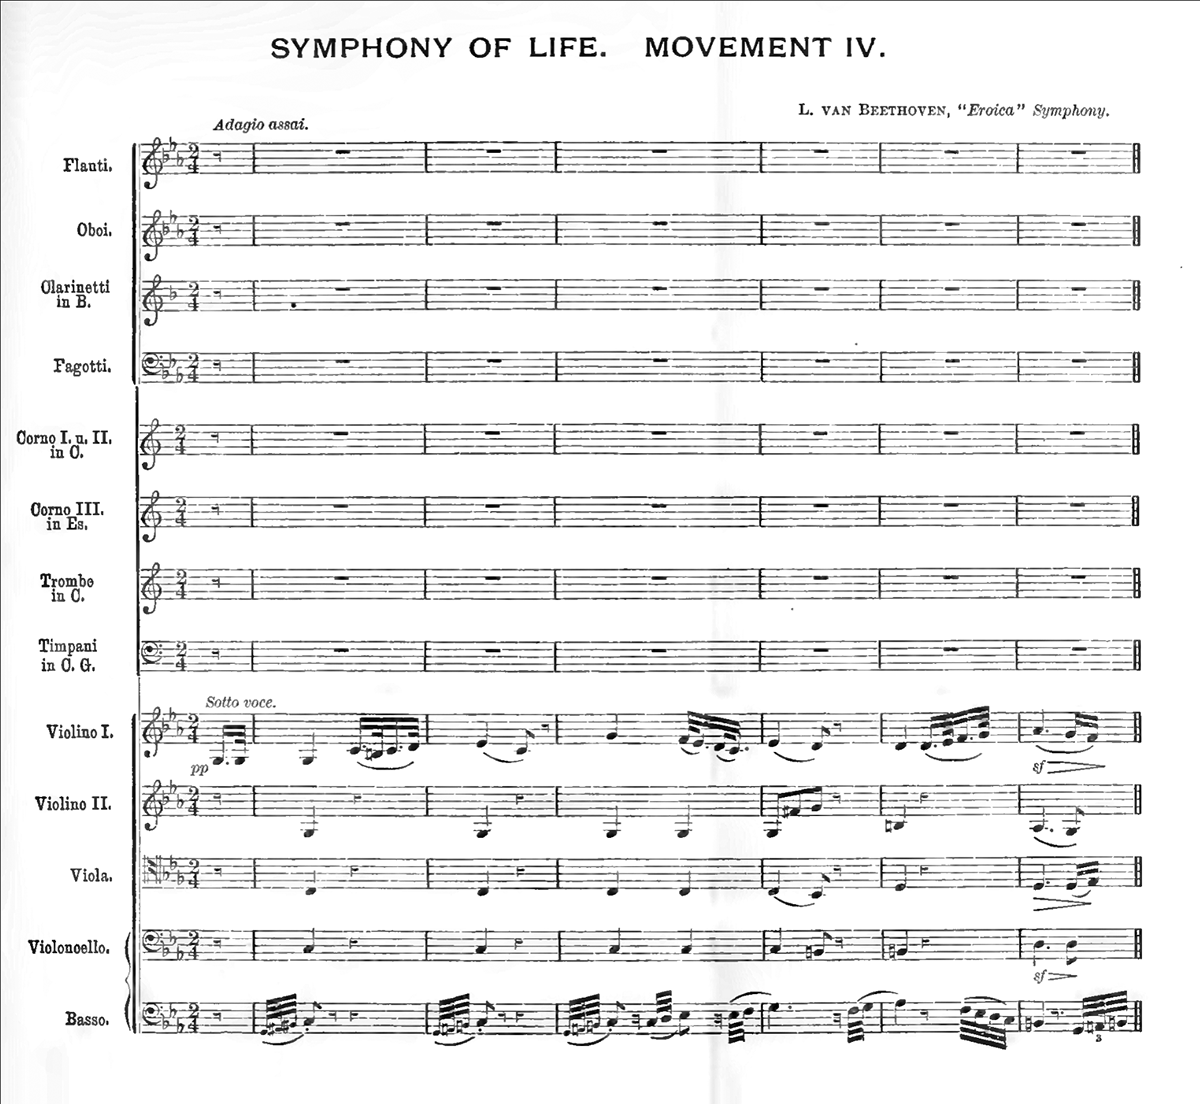 {Symphony of Life, Movement 1. The first page of the score of the fourth movement, Adagio assai, of Beethoven}